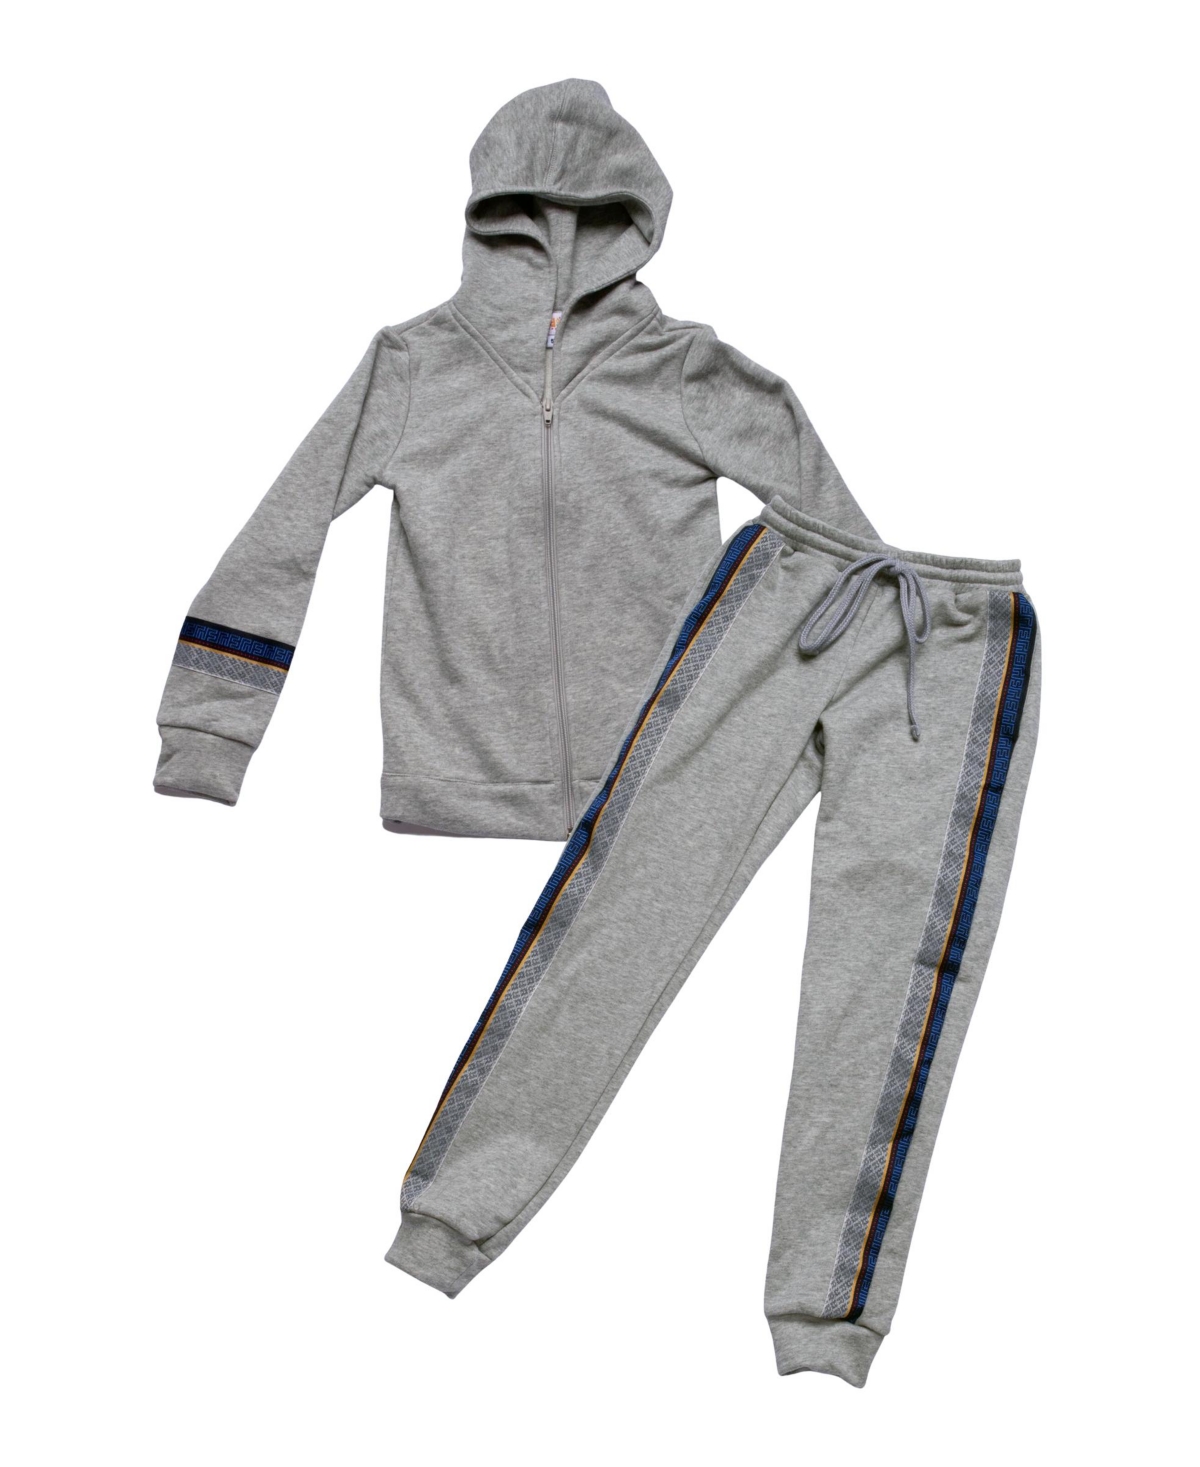 MIXED UP CLOTHING LITTLE BOYS ZIP FRONT HOODIE AND JOGGERS SET